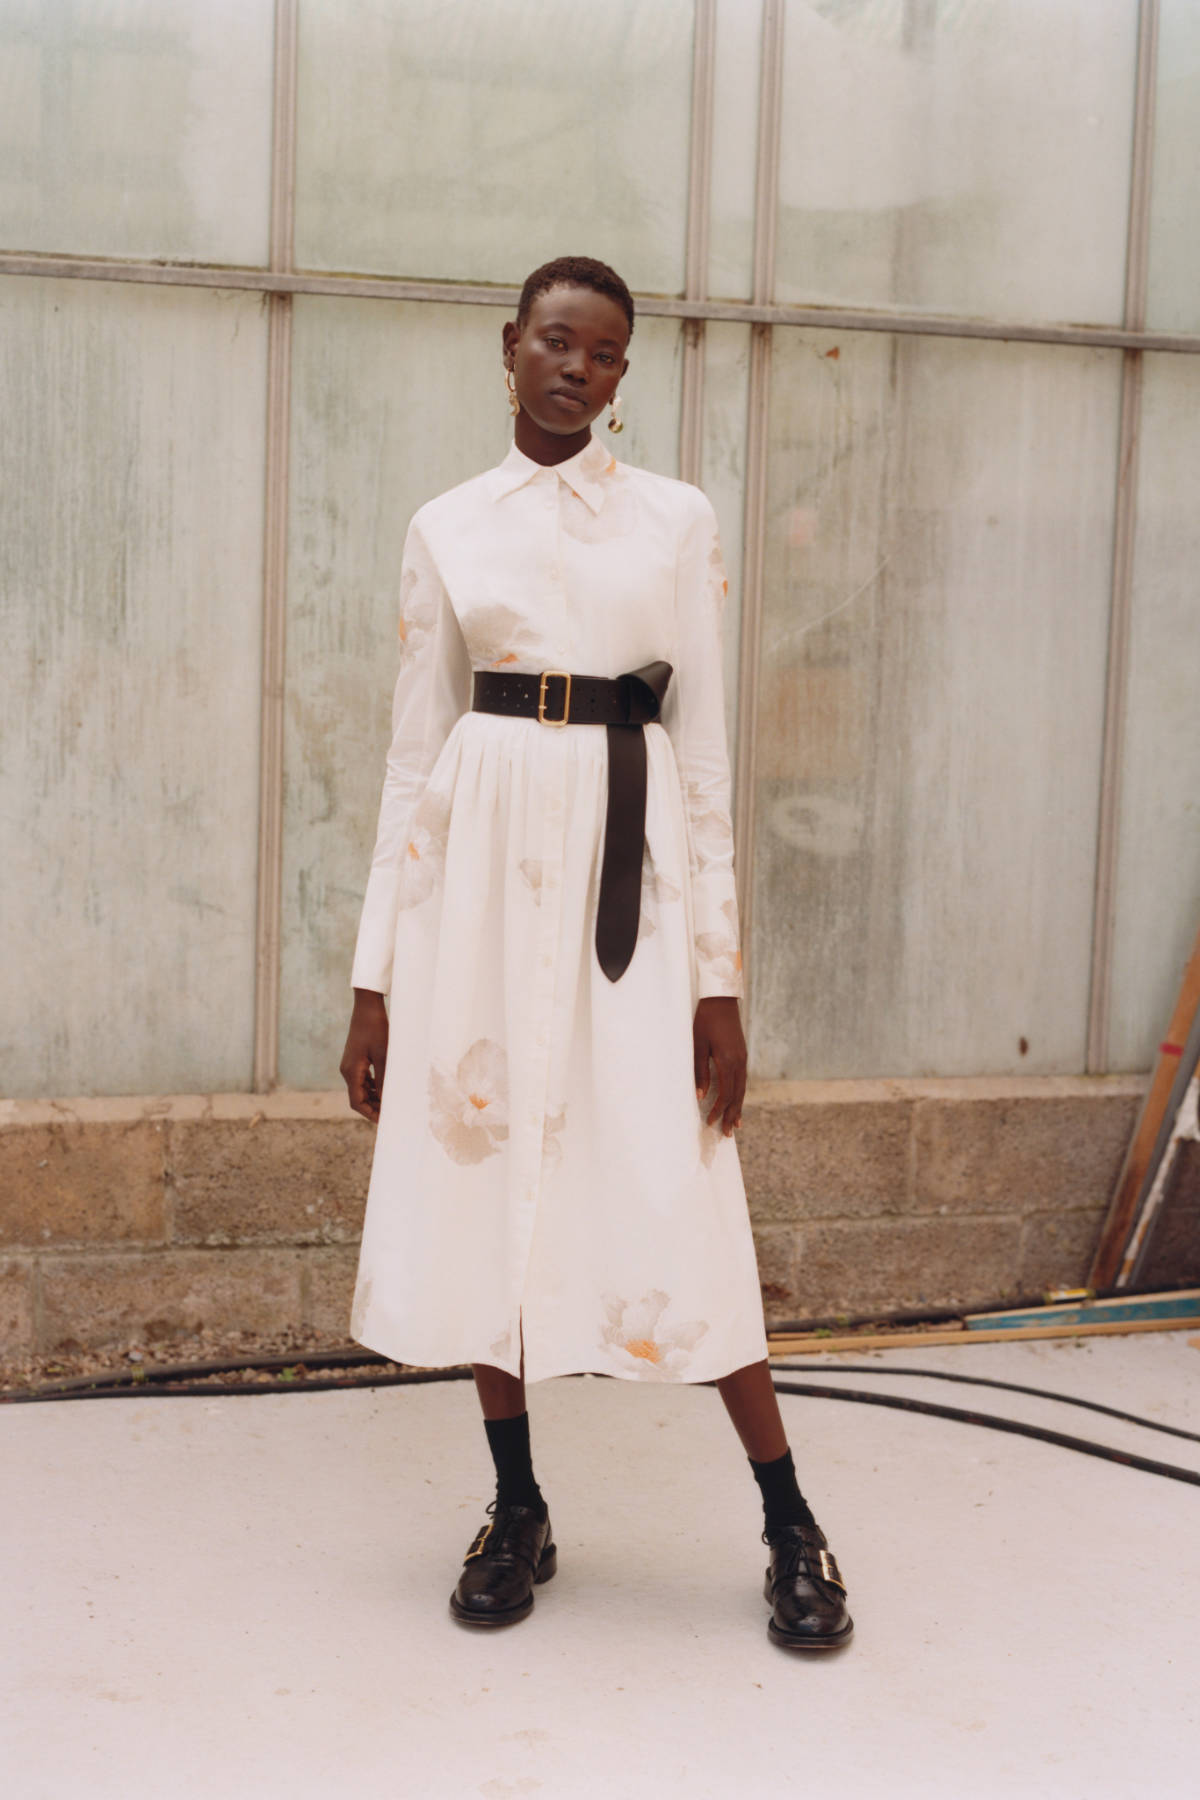 Erdem Presents Its New Womenswear Pre-Spring 2023 Collection